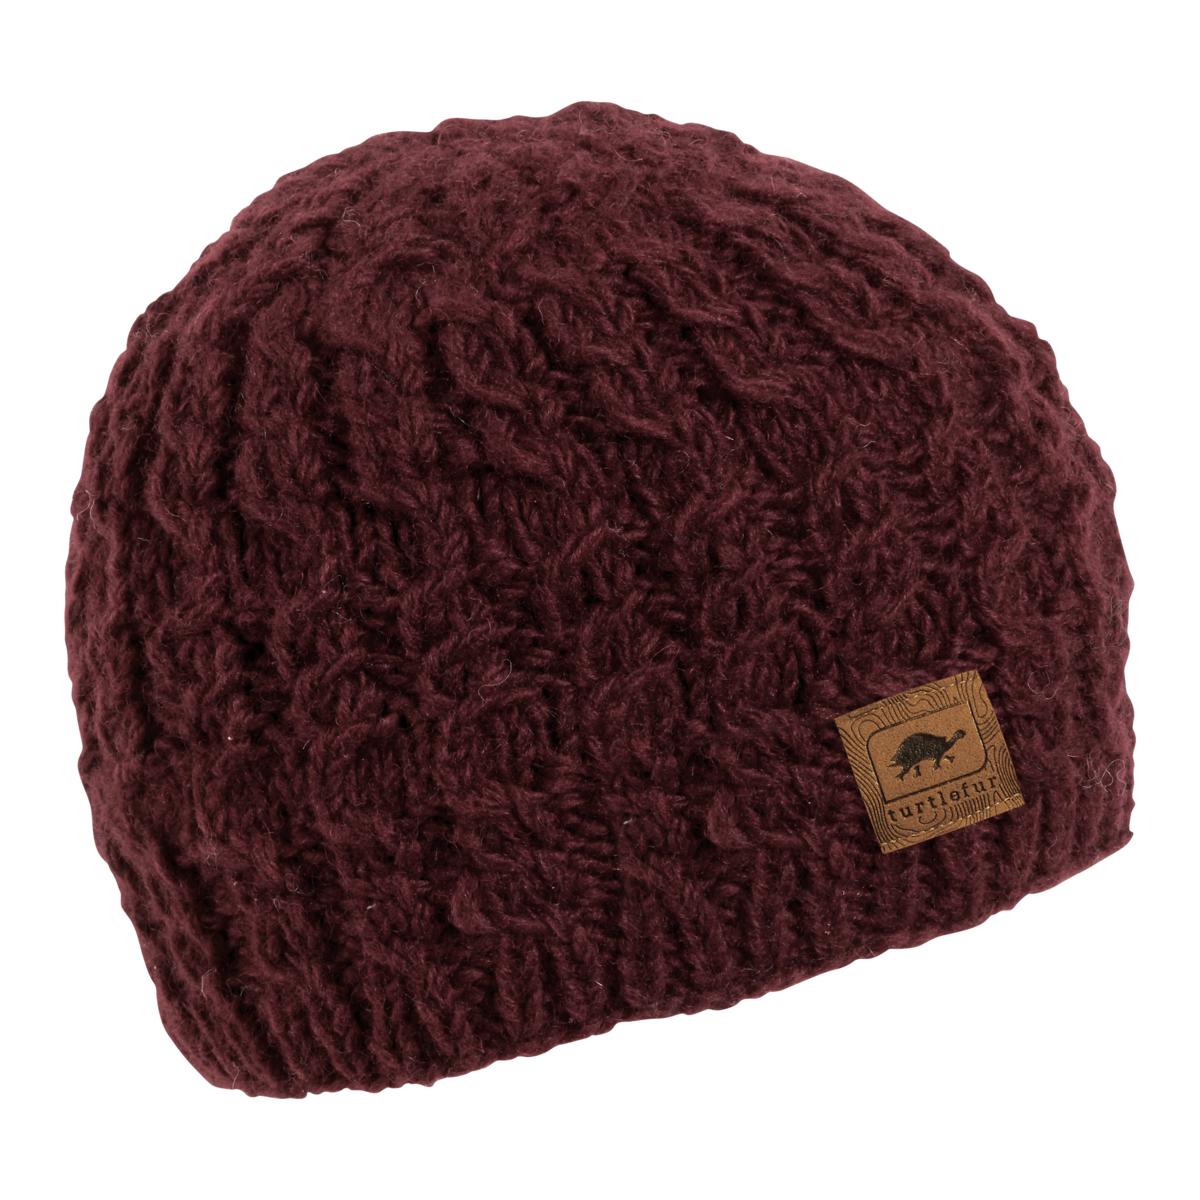 Turtle Fur Mika Womens Wool Beanie - Nepal Collection Bordeaux